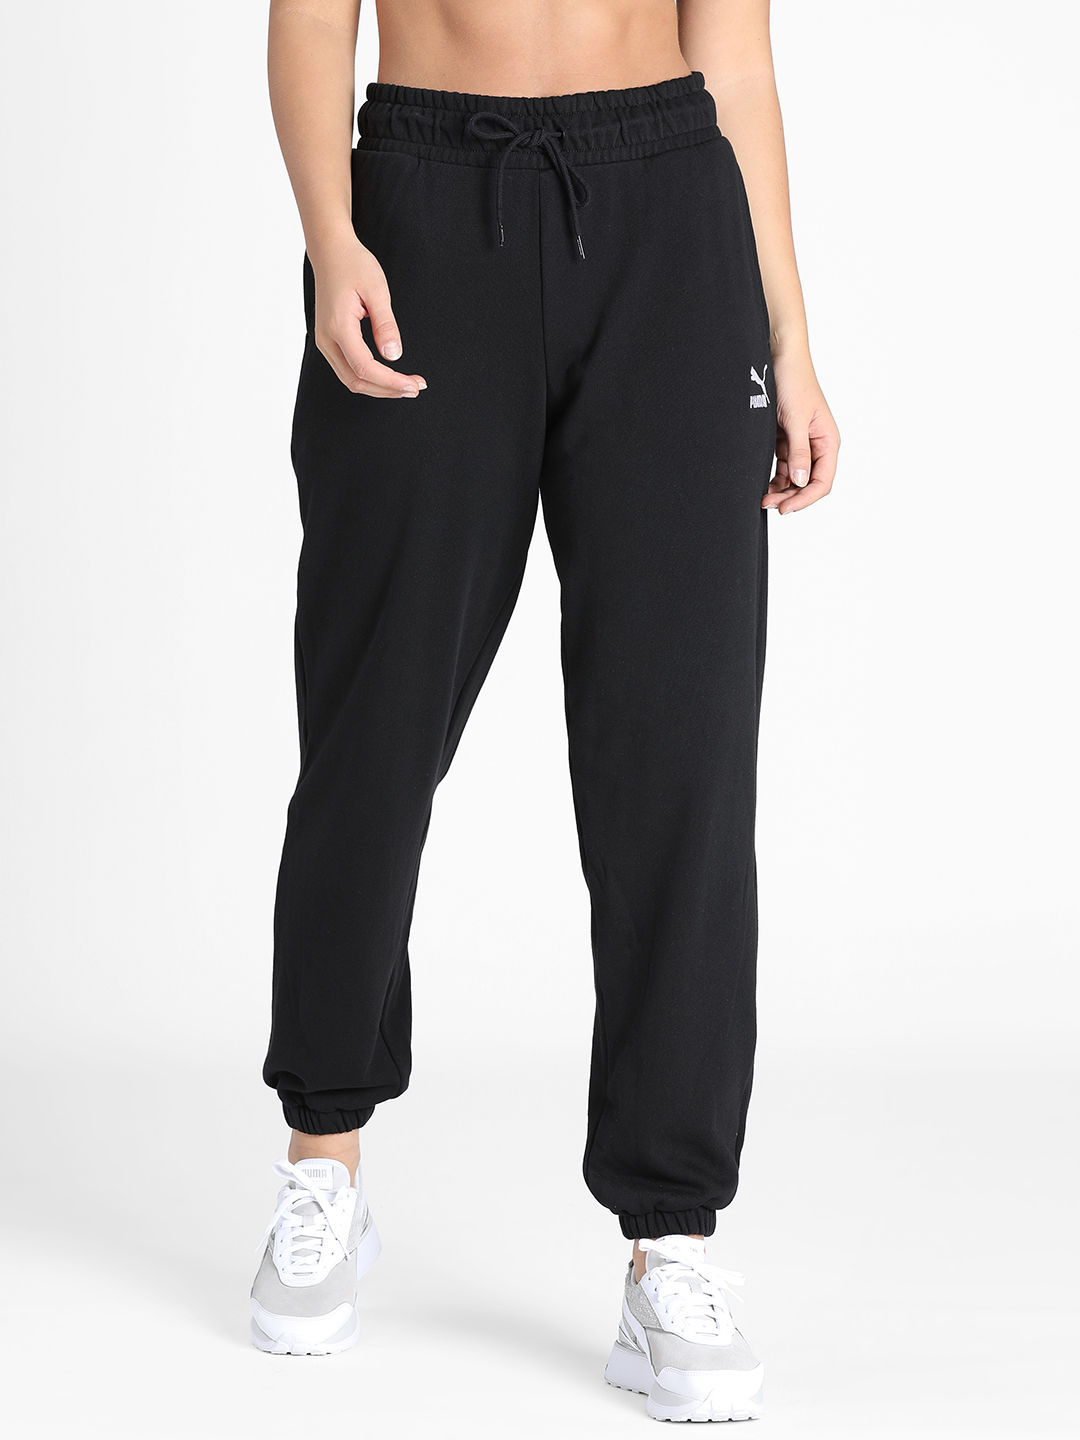 Buy Trackpants  Joggers for Women at Upto 50 Off  PUMA